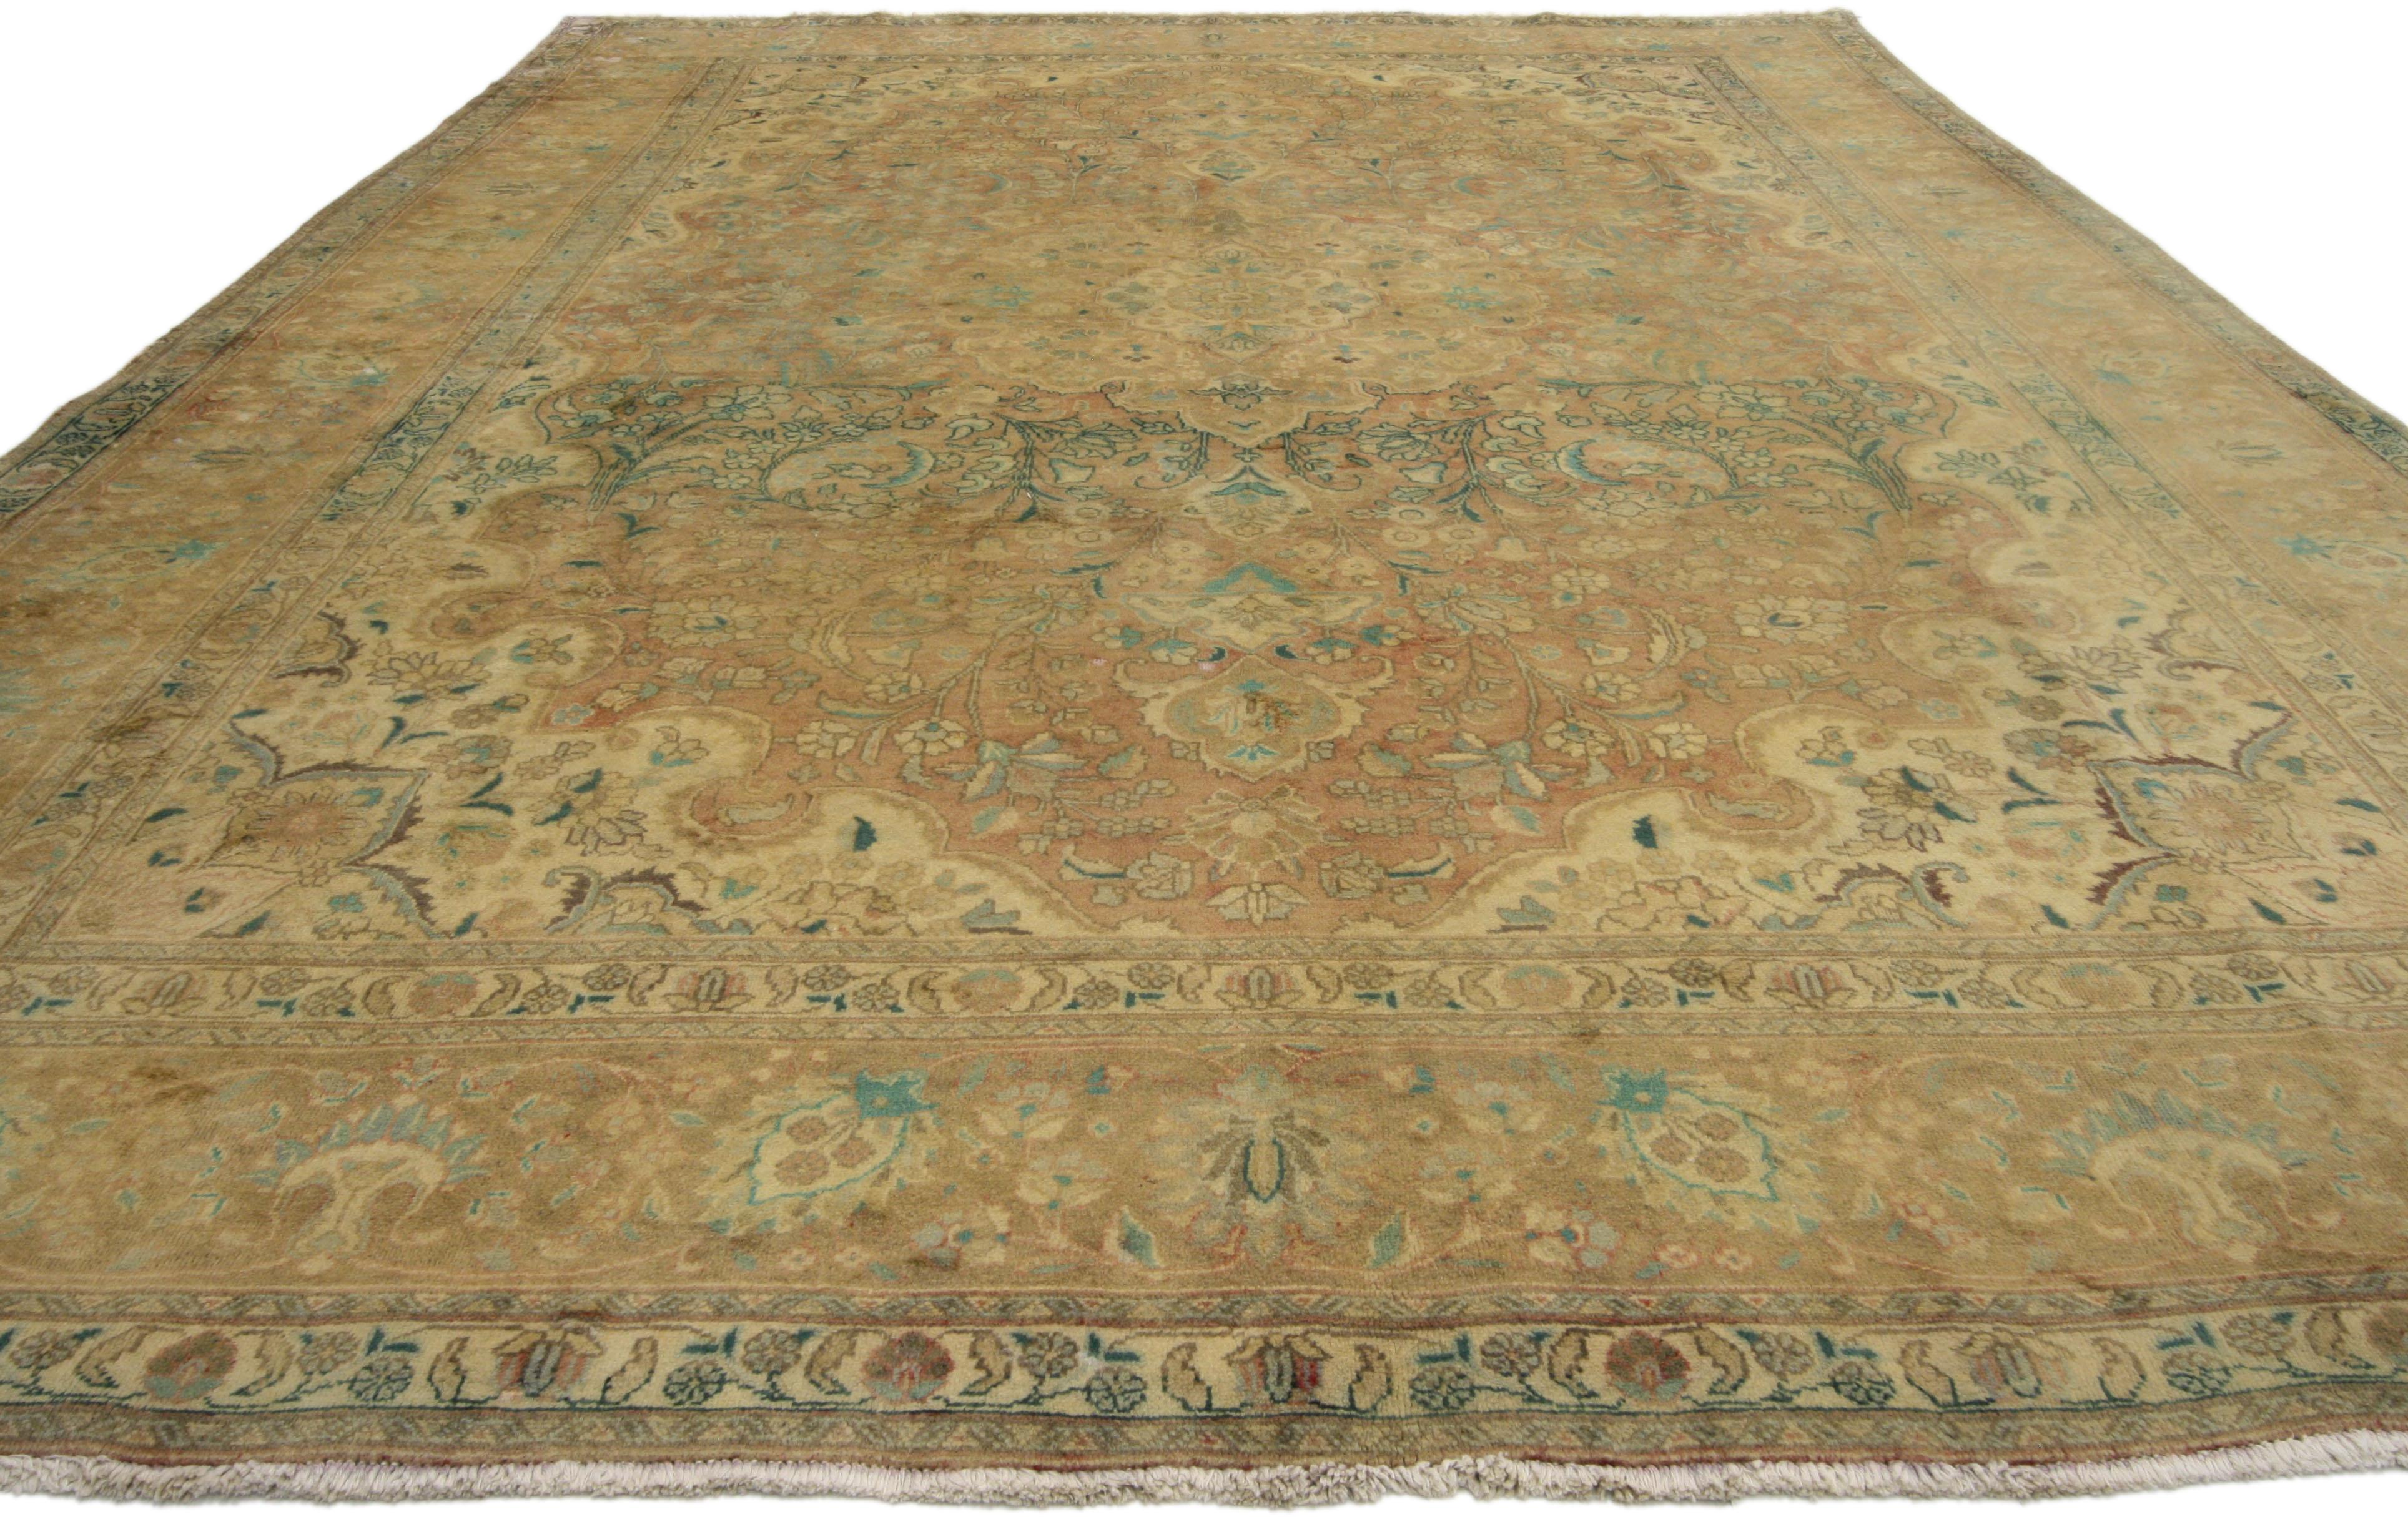 76433, vintage Persian Tabriz Area rug with traditional style. This hand-knotted wool vintage Persian Tabriz rug features an intricate cusped medallion flanked with palmette finials surrounded by all-over florals, blooming vines and palmettes. It is